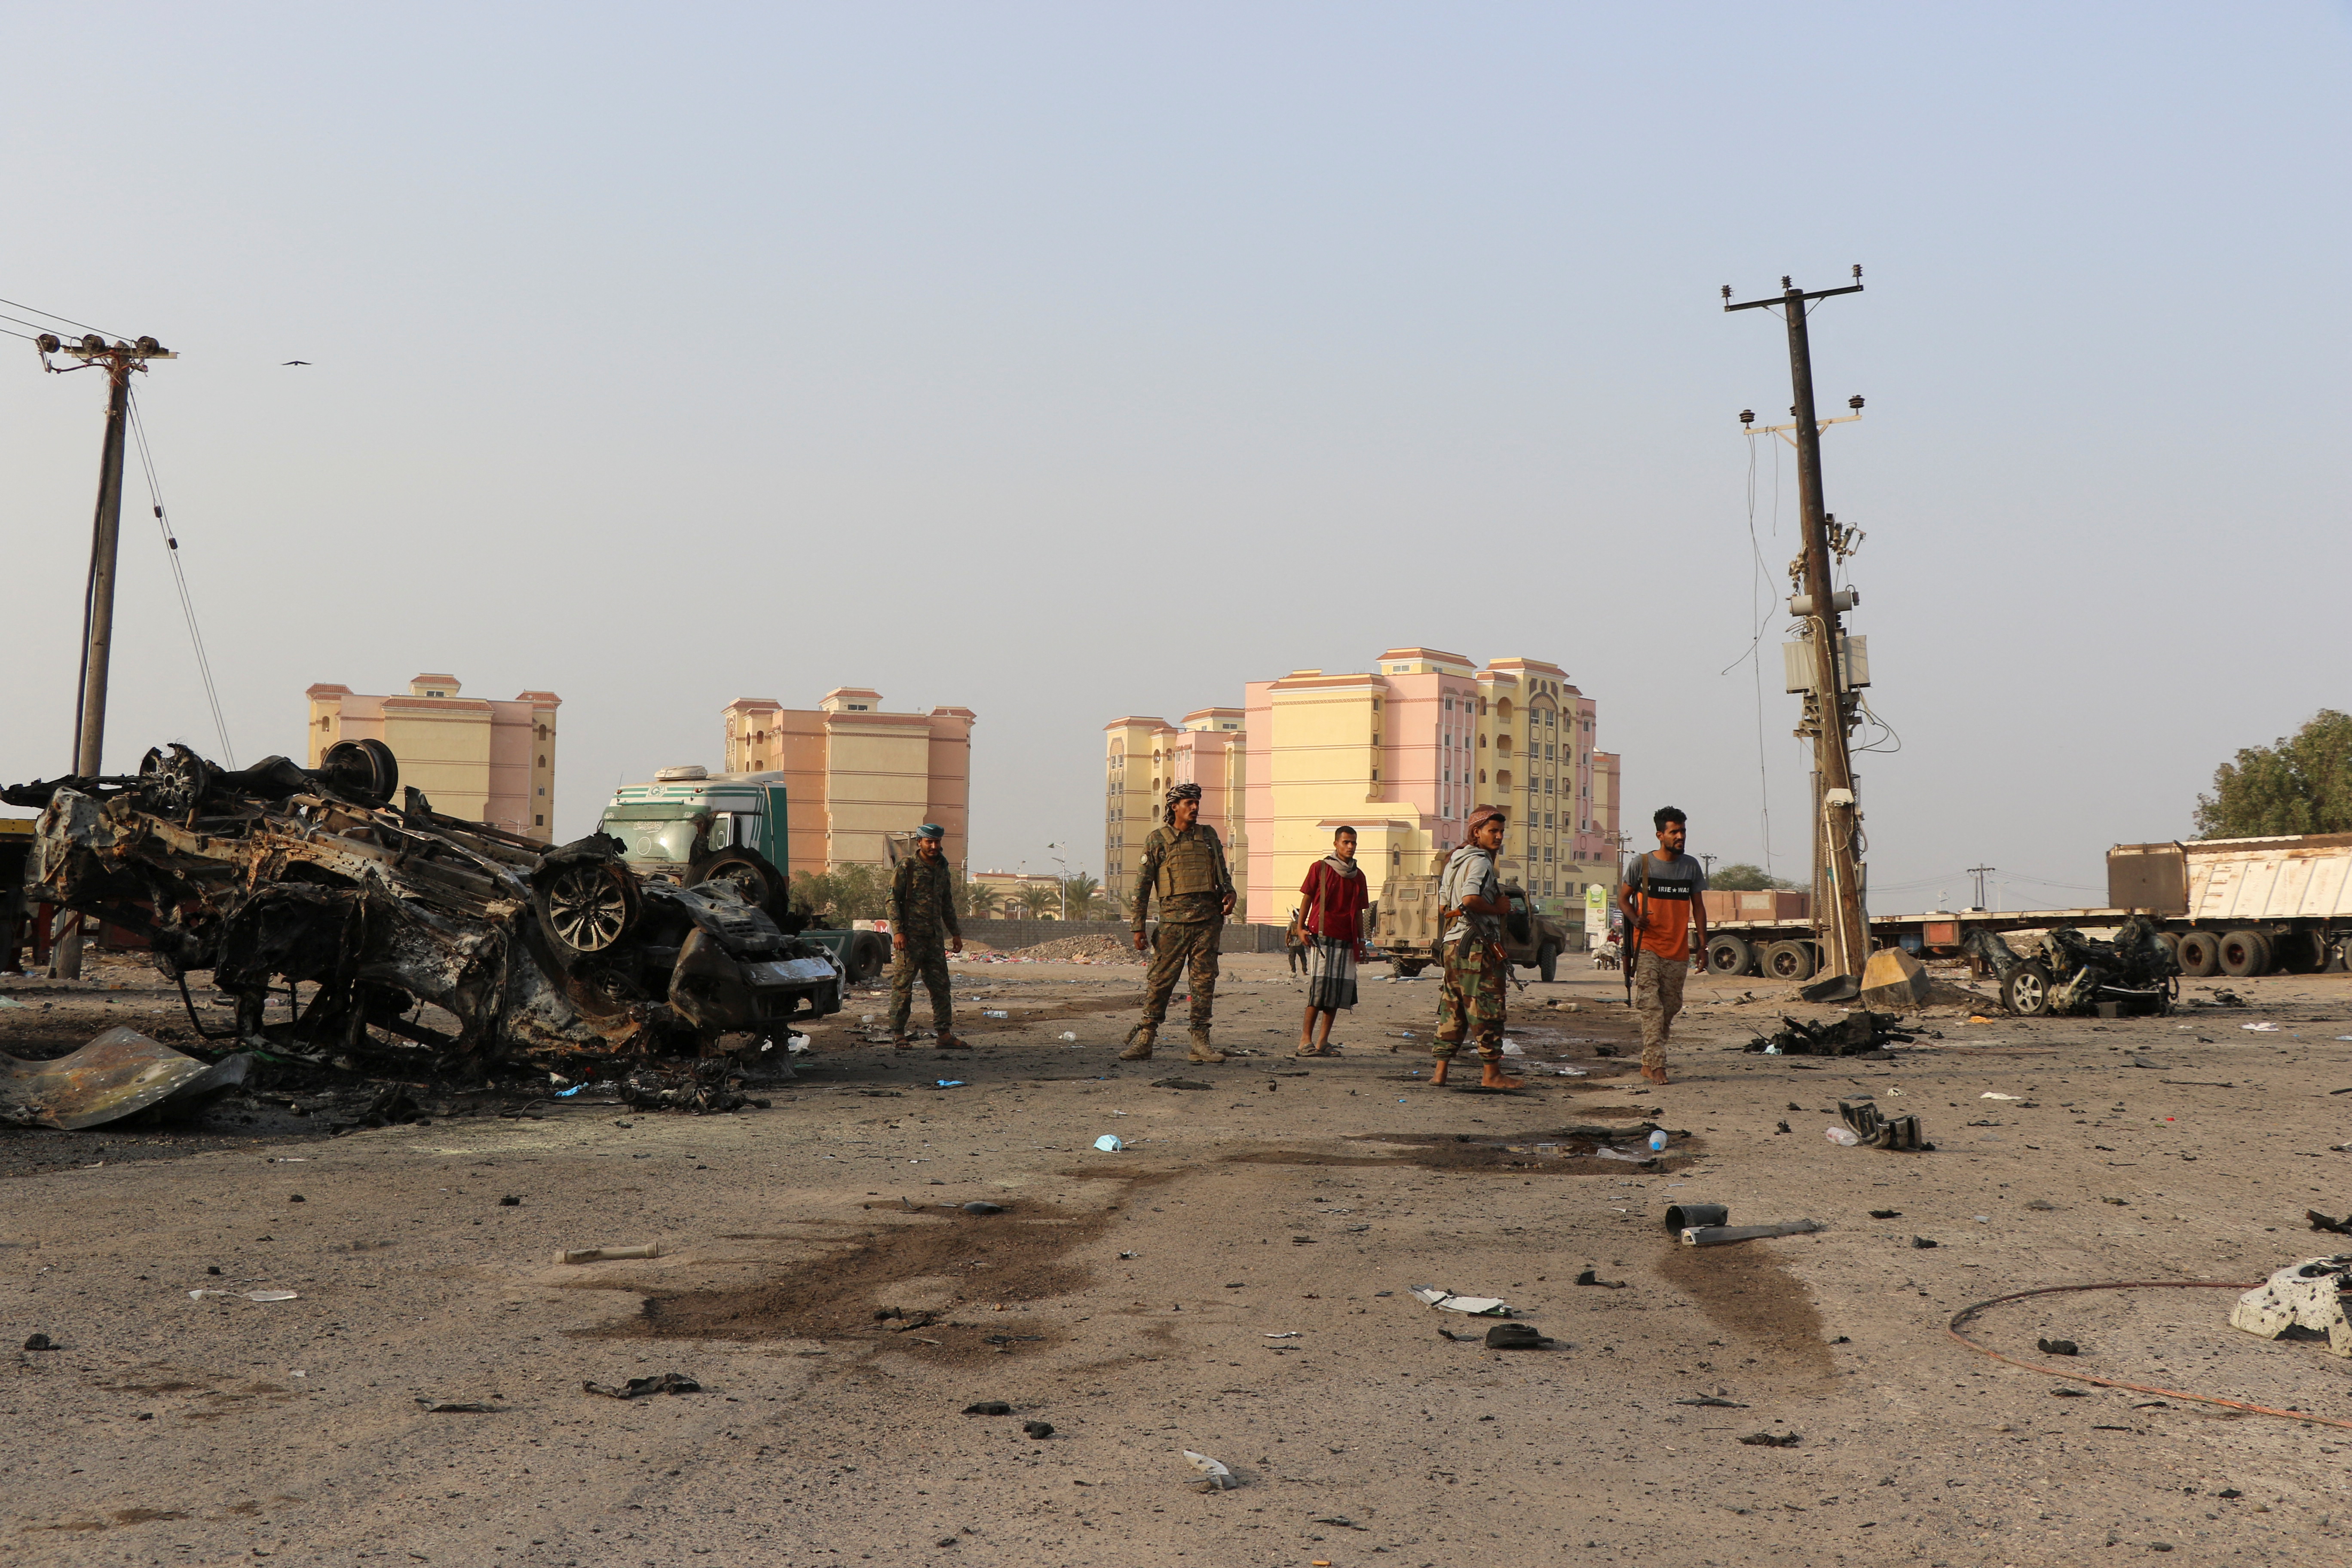 Soldiers stand by the wreckage of a vehicle at the scene of a car bomb attack in the southern port city of Aden